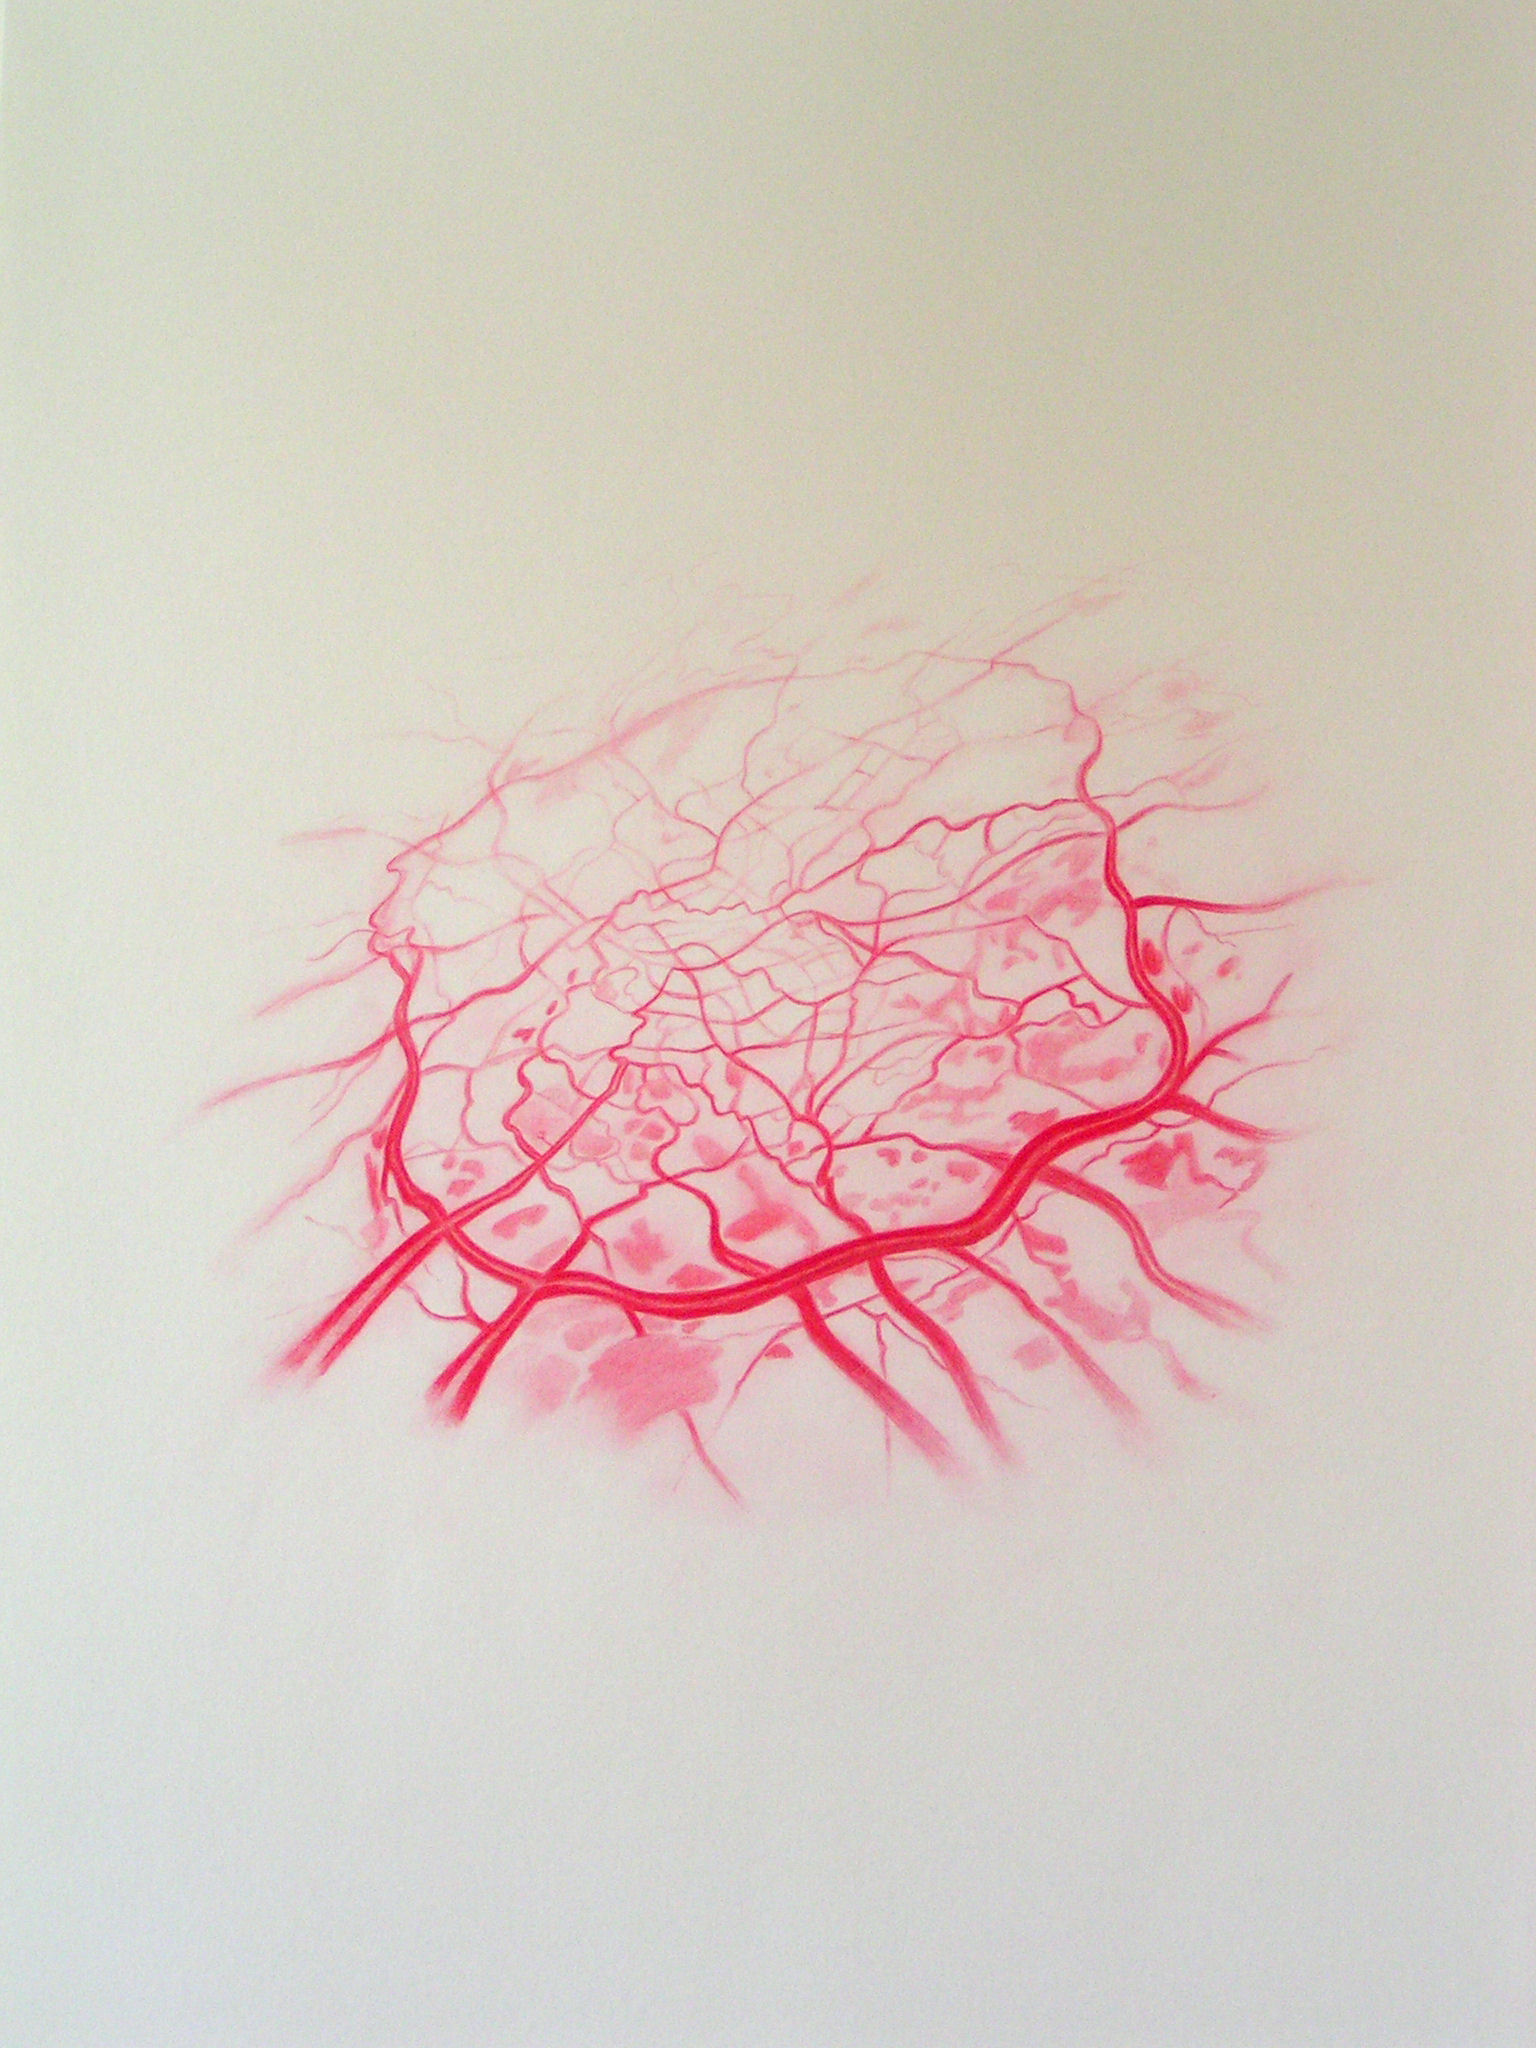 Emma J Williams 'Untitled Red Drawing No.8' 2008 pencil on paper